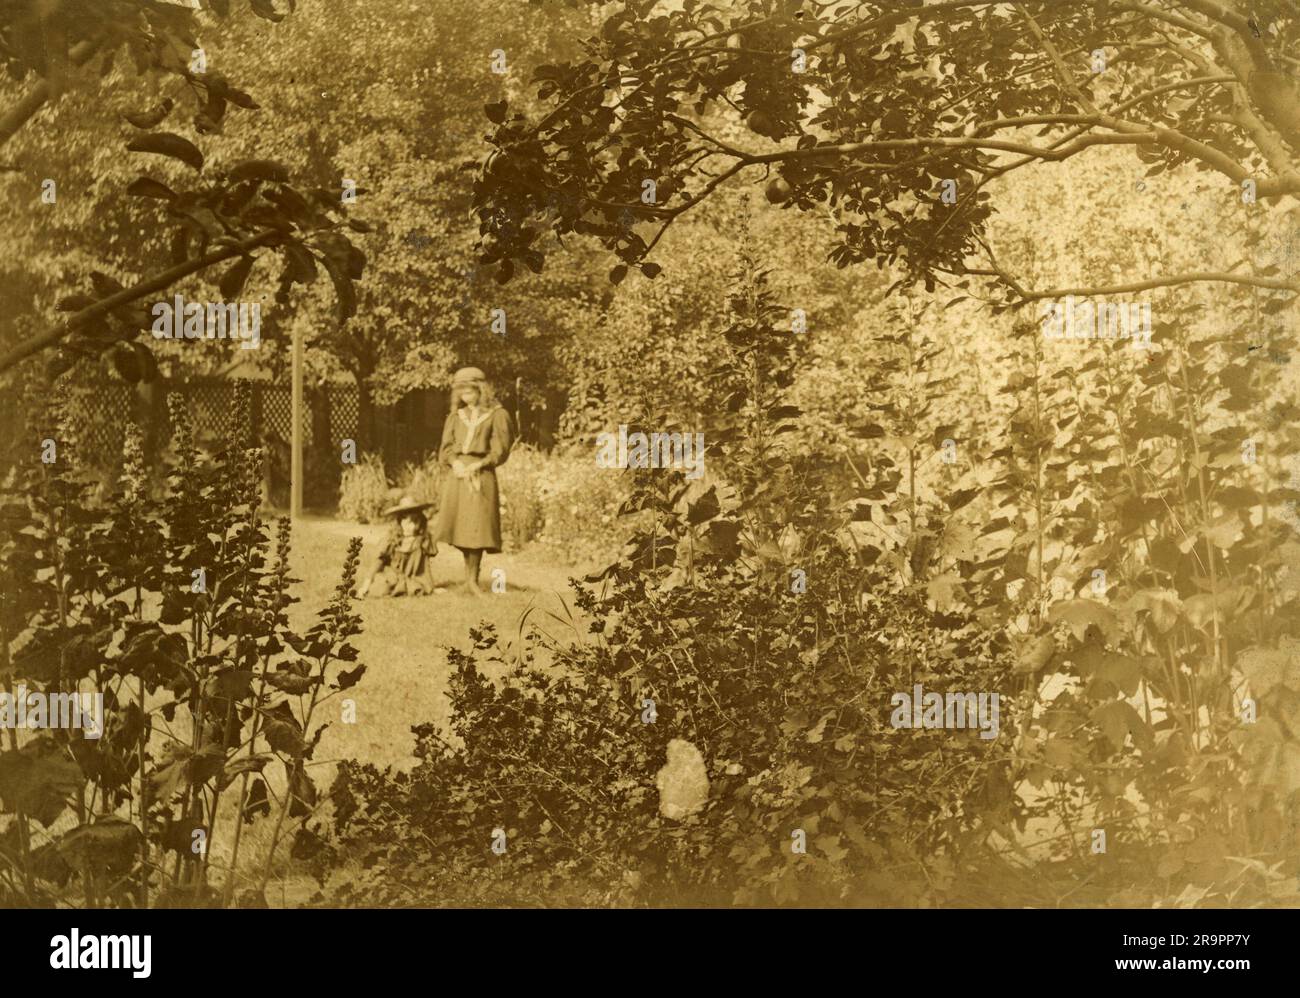 Mainly images of children in gardens. Late Victorian to Edwardian period. Stock Photo